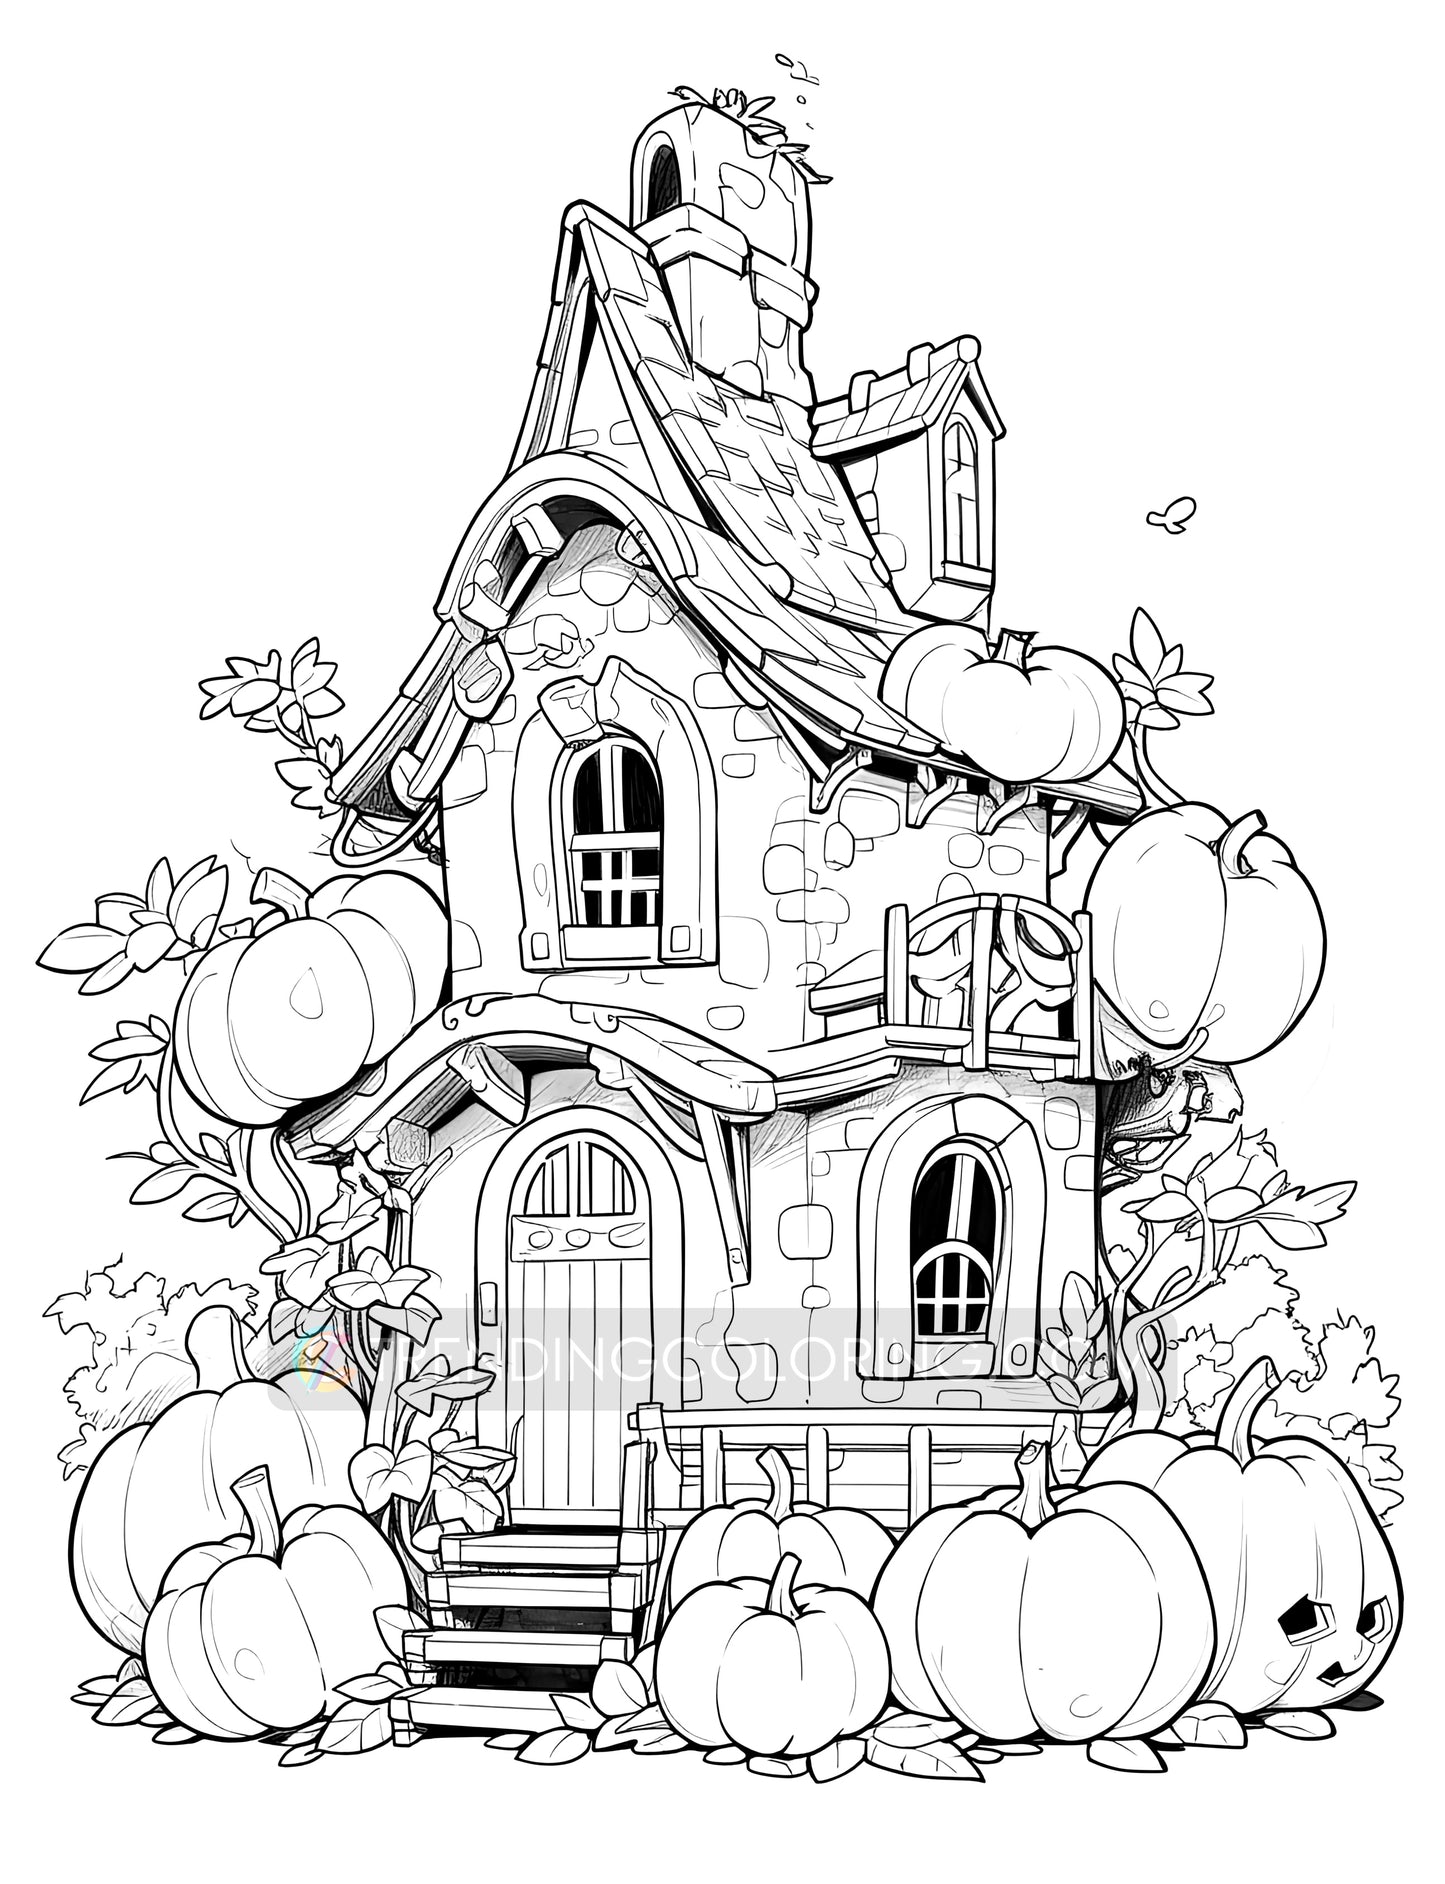 50 Pumpkin Fairy House Coloring Pages - Instant Download - Printable